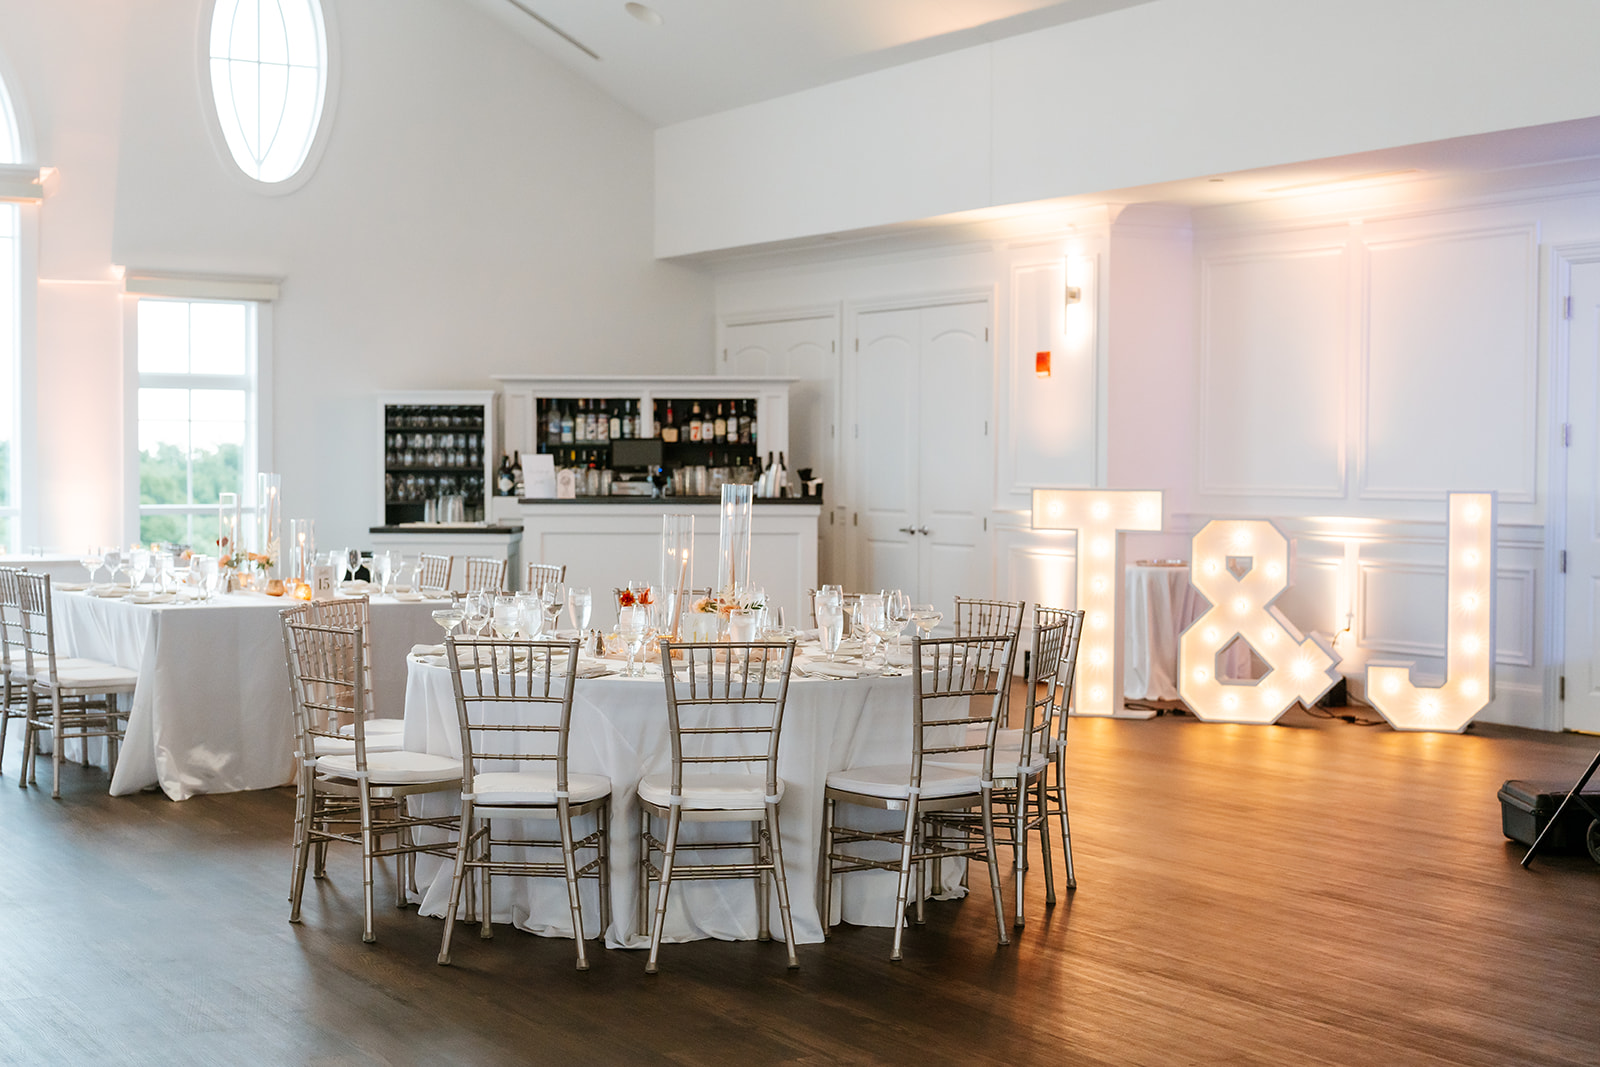 A beautifully set wedding reception table with elegant white linens and chairs, ready for a celebration of love.